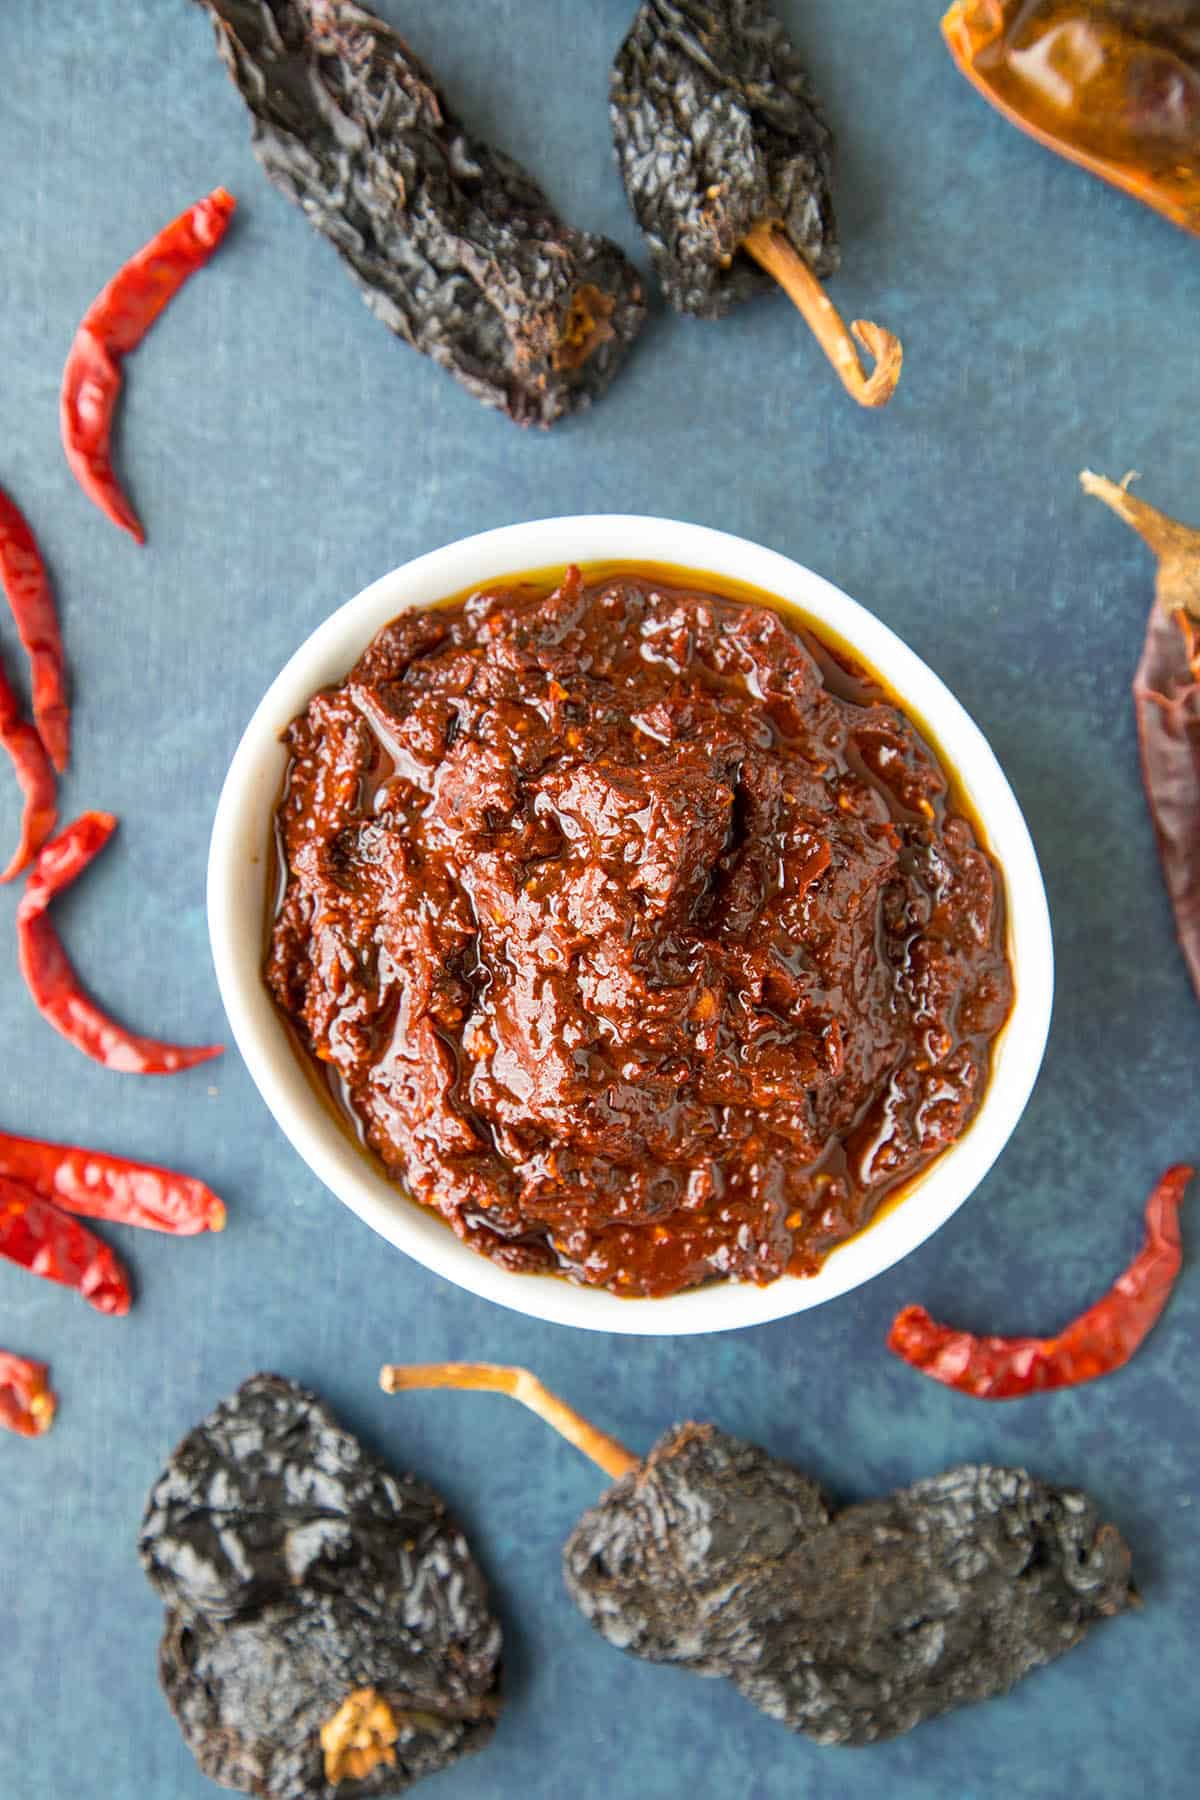 Homemade Harissa in a bowl - it's a wonderfully versatile chili paste